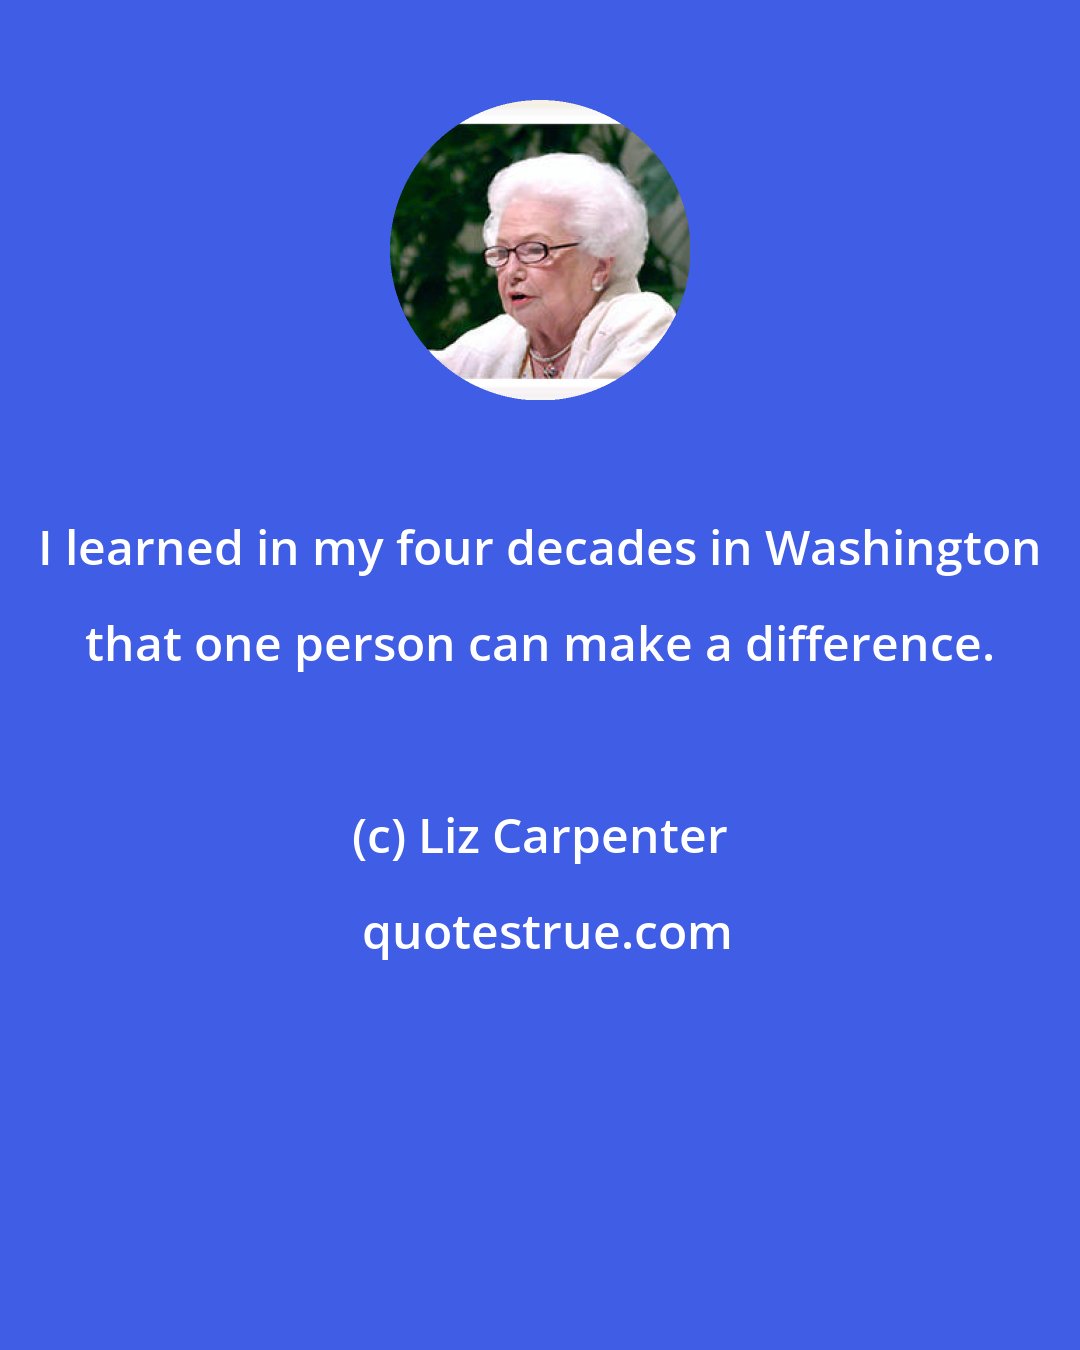 Liz Carpenter: I learned in my four decades in Washington that one person can make a difference.